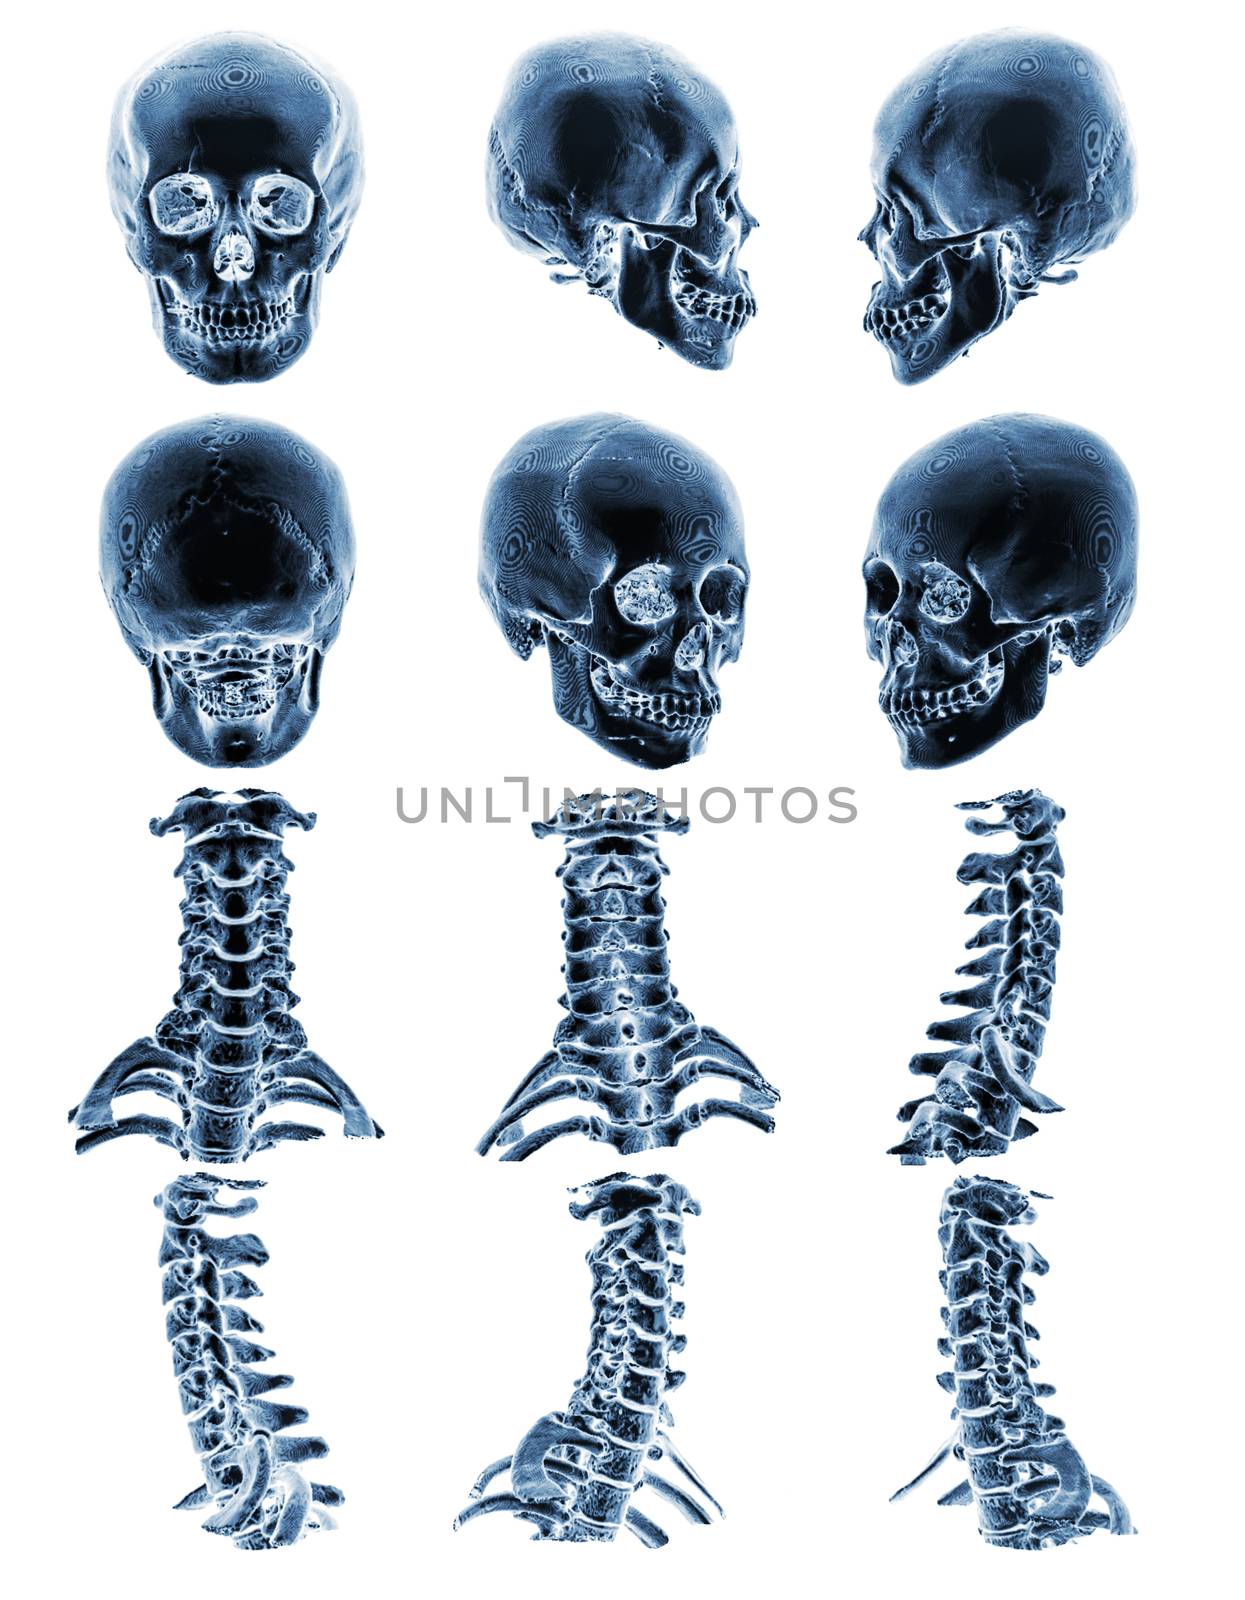 CT scan ( Computed tomography ) with 3D graphic show normal human skull and cervical spine by stockdevil